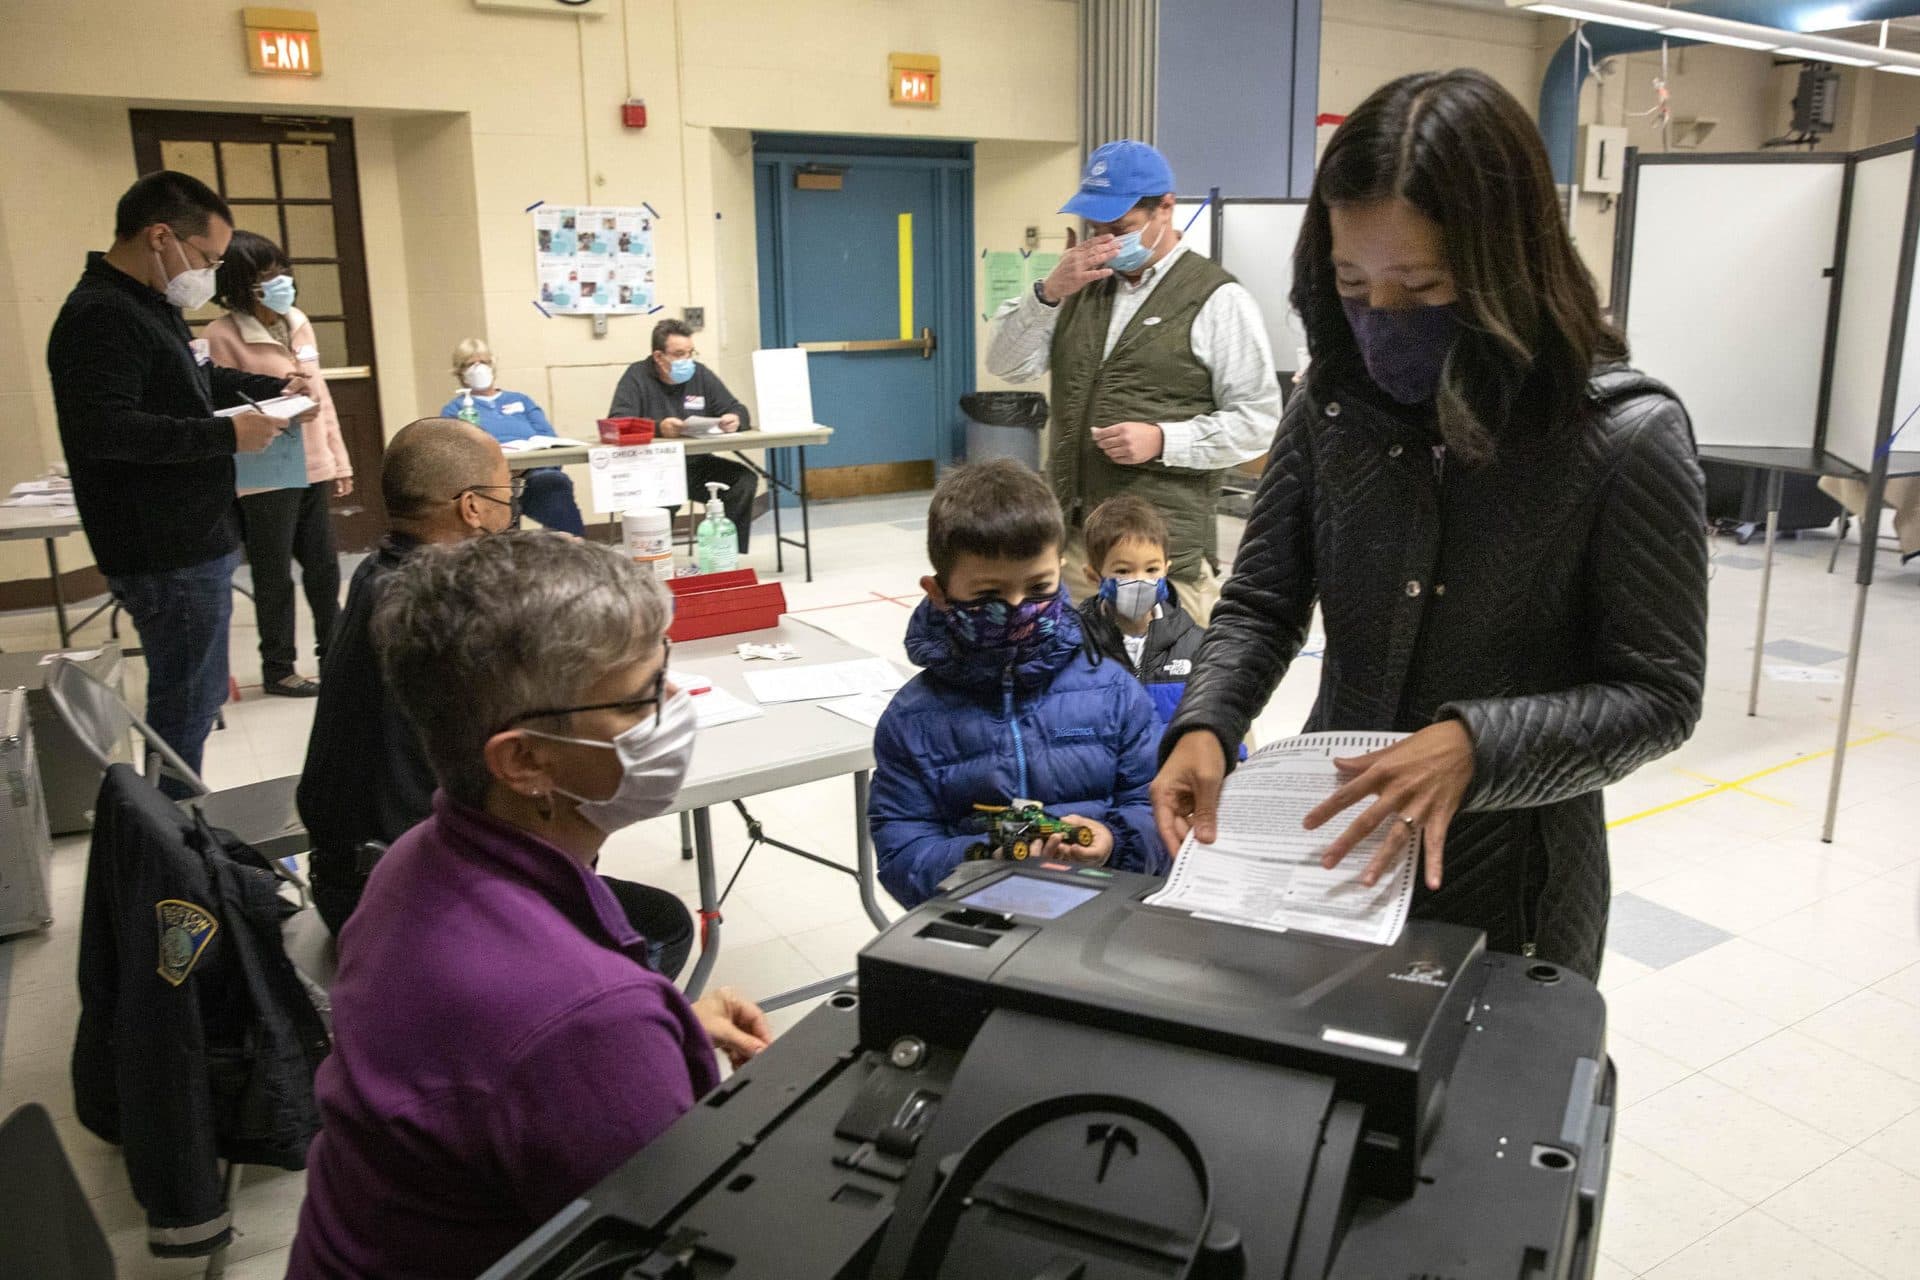 Michelle Wu casts her ballot with her family at the Phineas Bates Elementary School in Roslindale. (Robin Lubbock/WBUR)